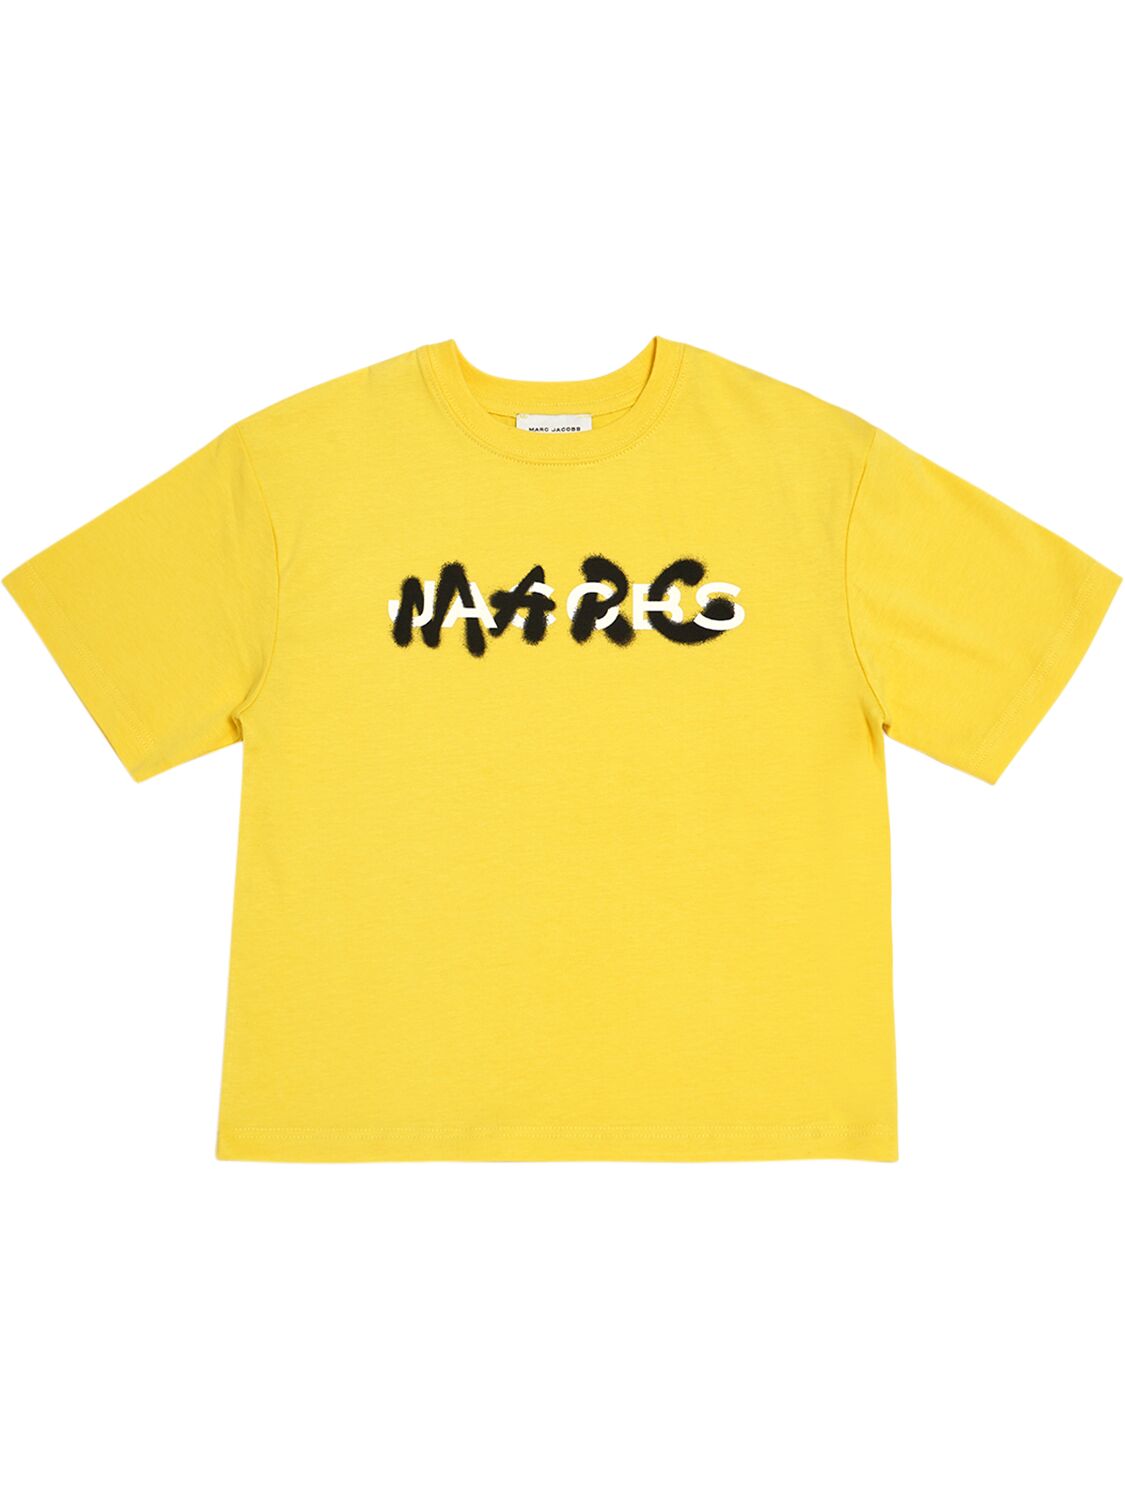 Marc Jacobs Kids' Organic Cotton Jersey T-shirt In 옐로우